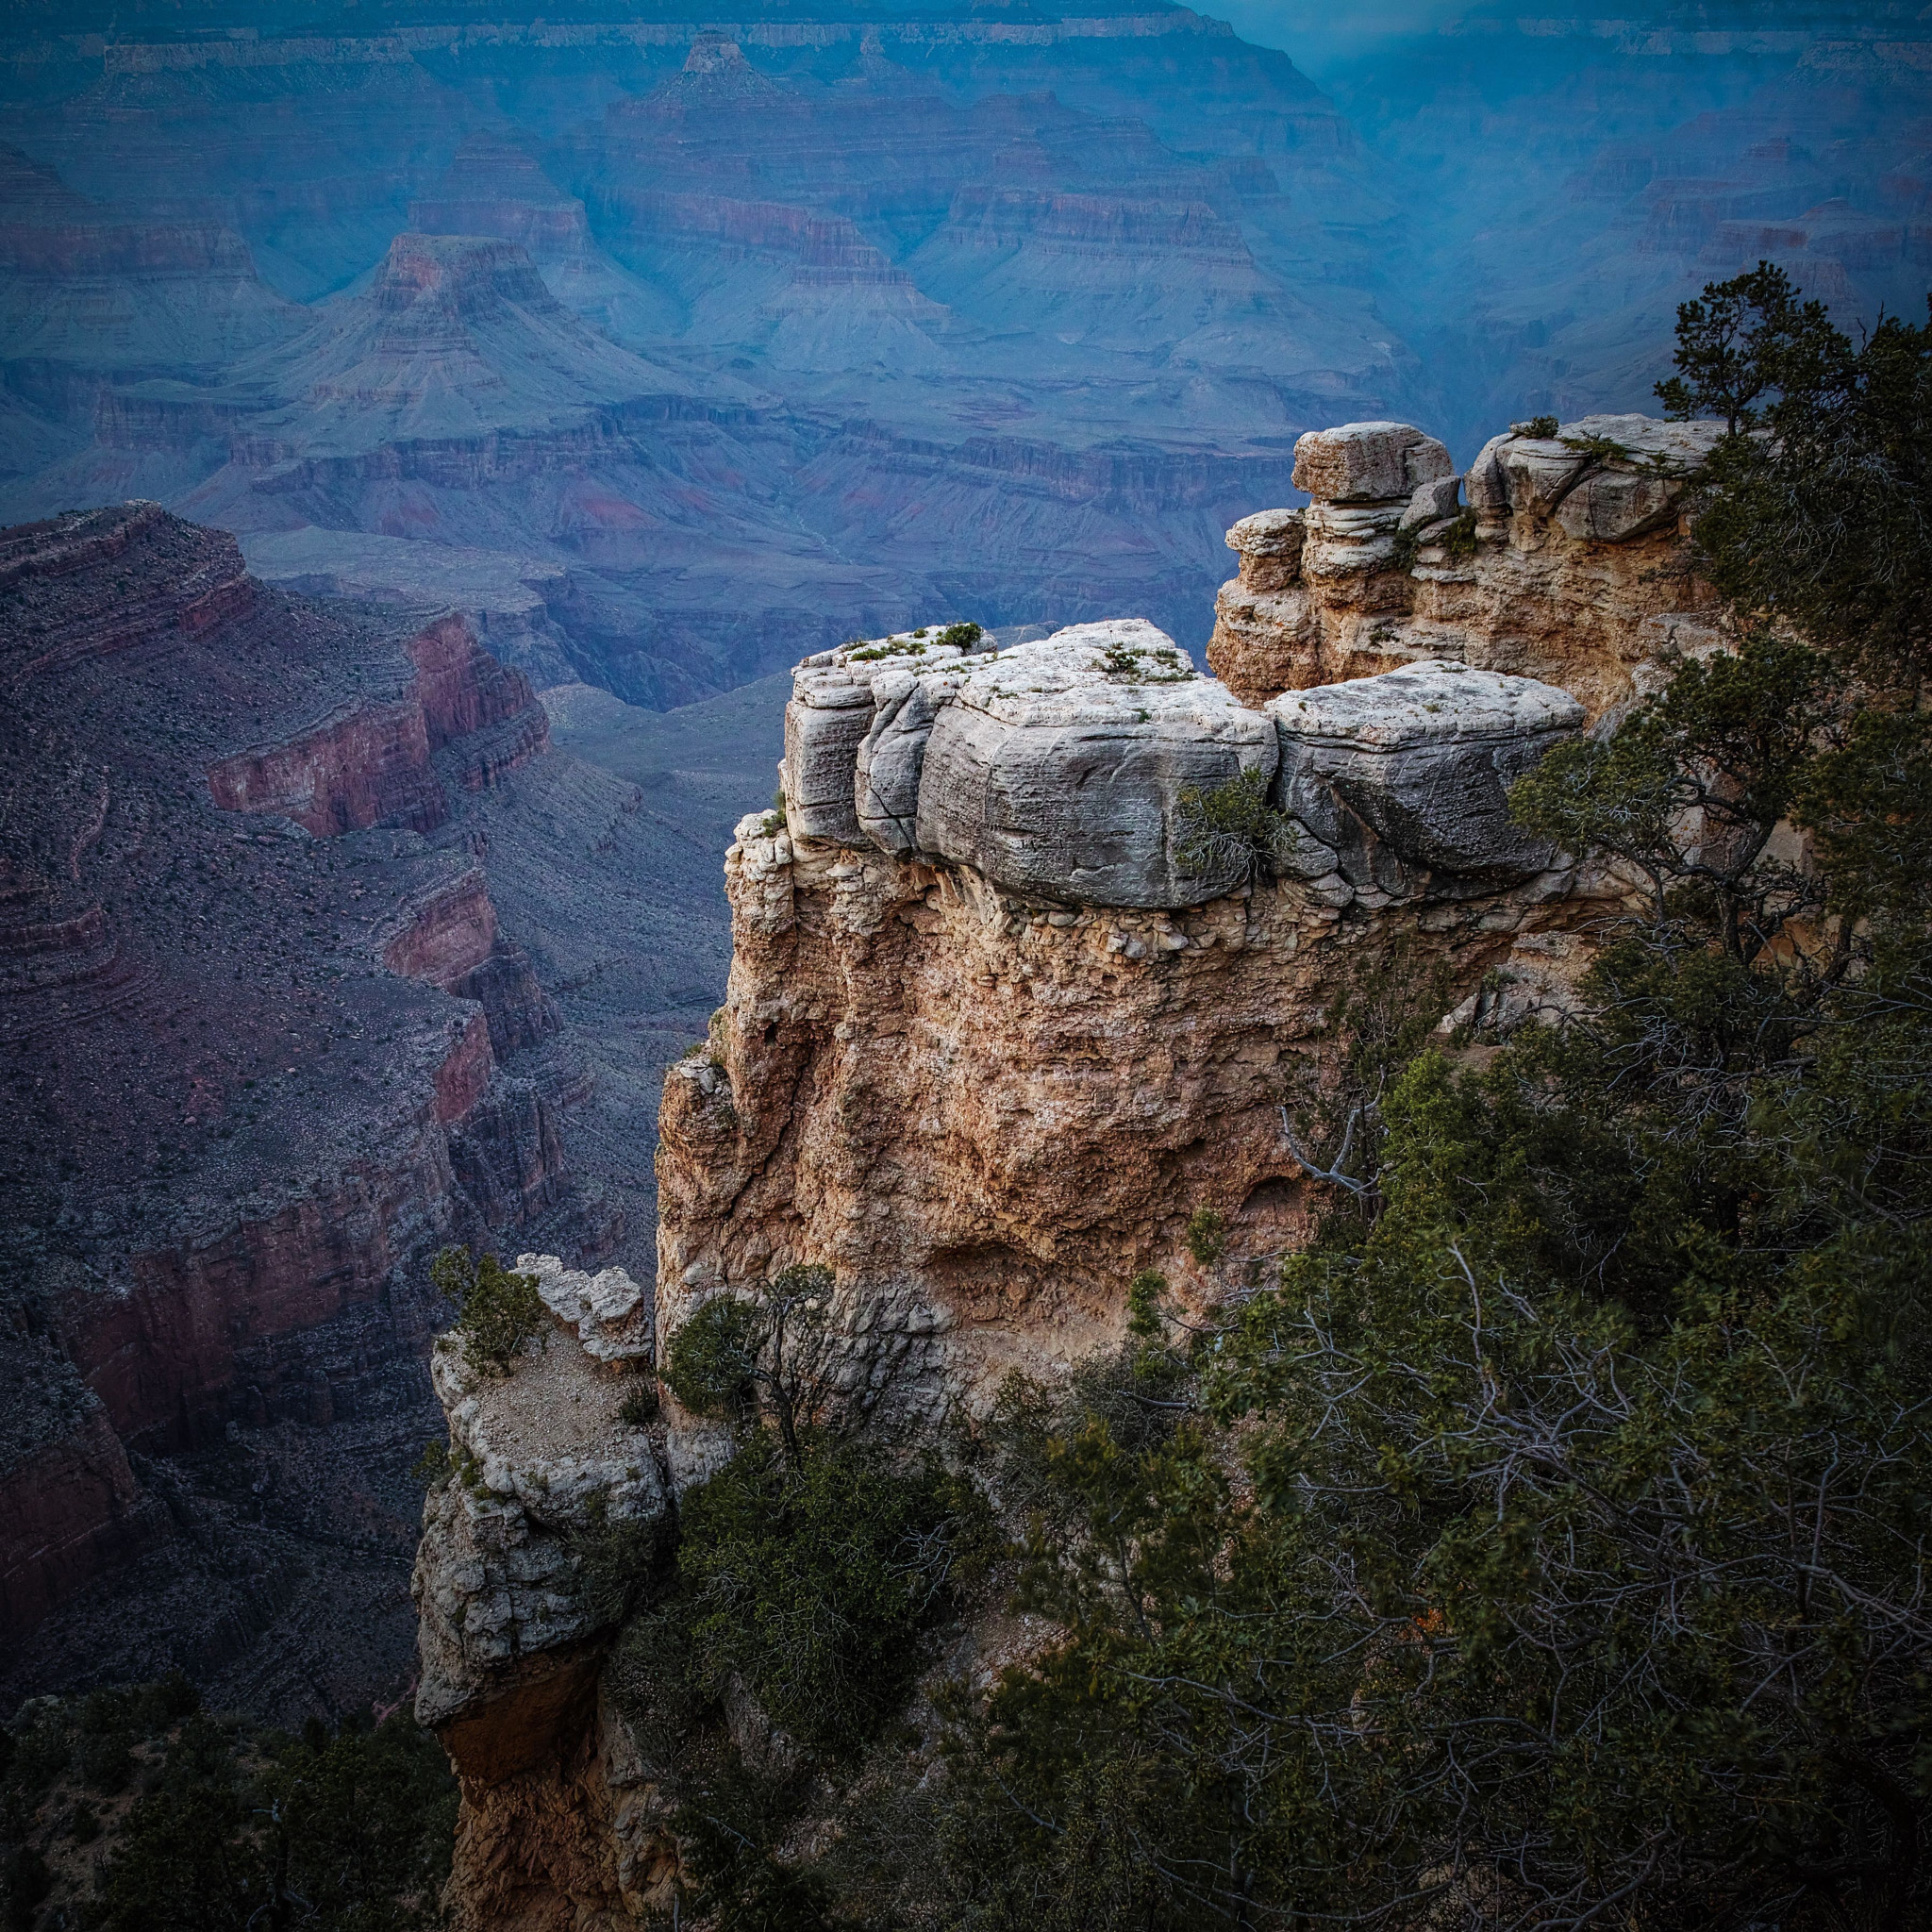 Sigma dp1 Quattro sample photo. Sunset at the grand canyon photography